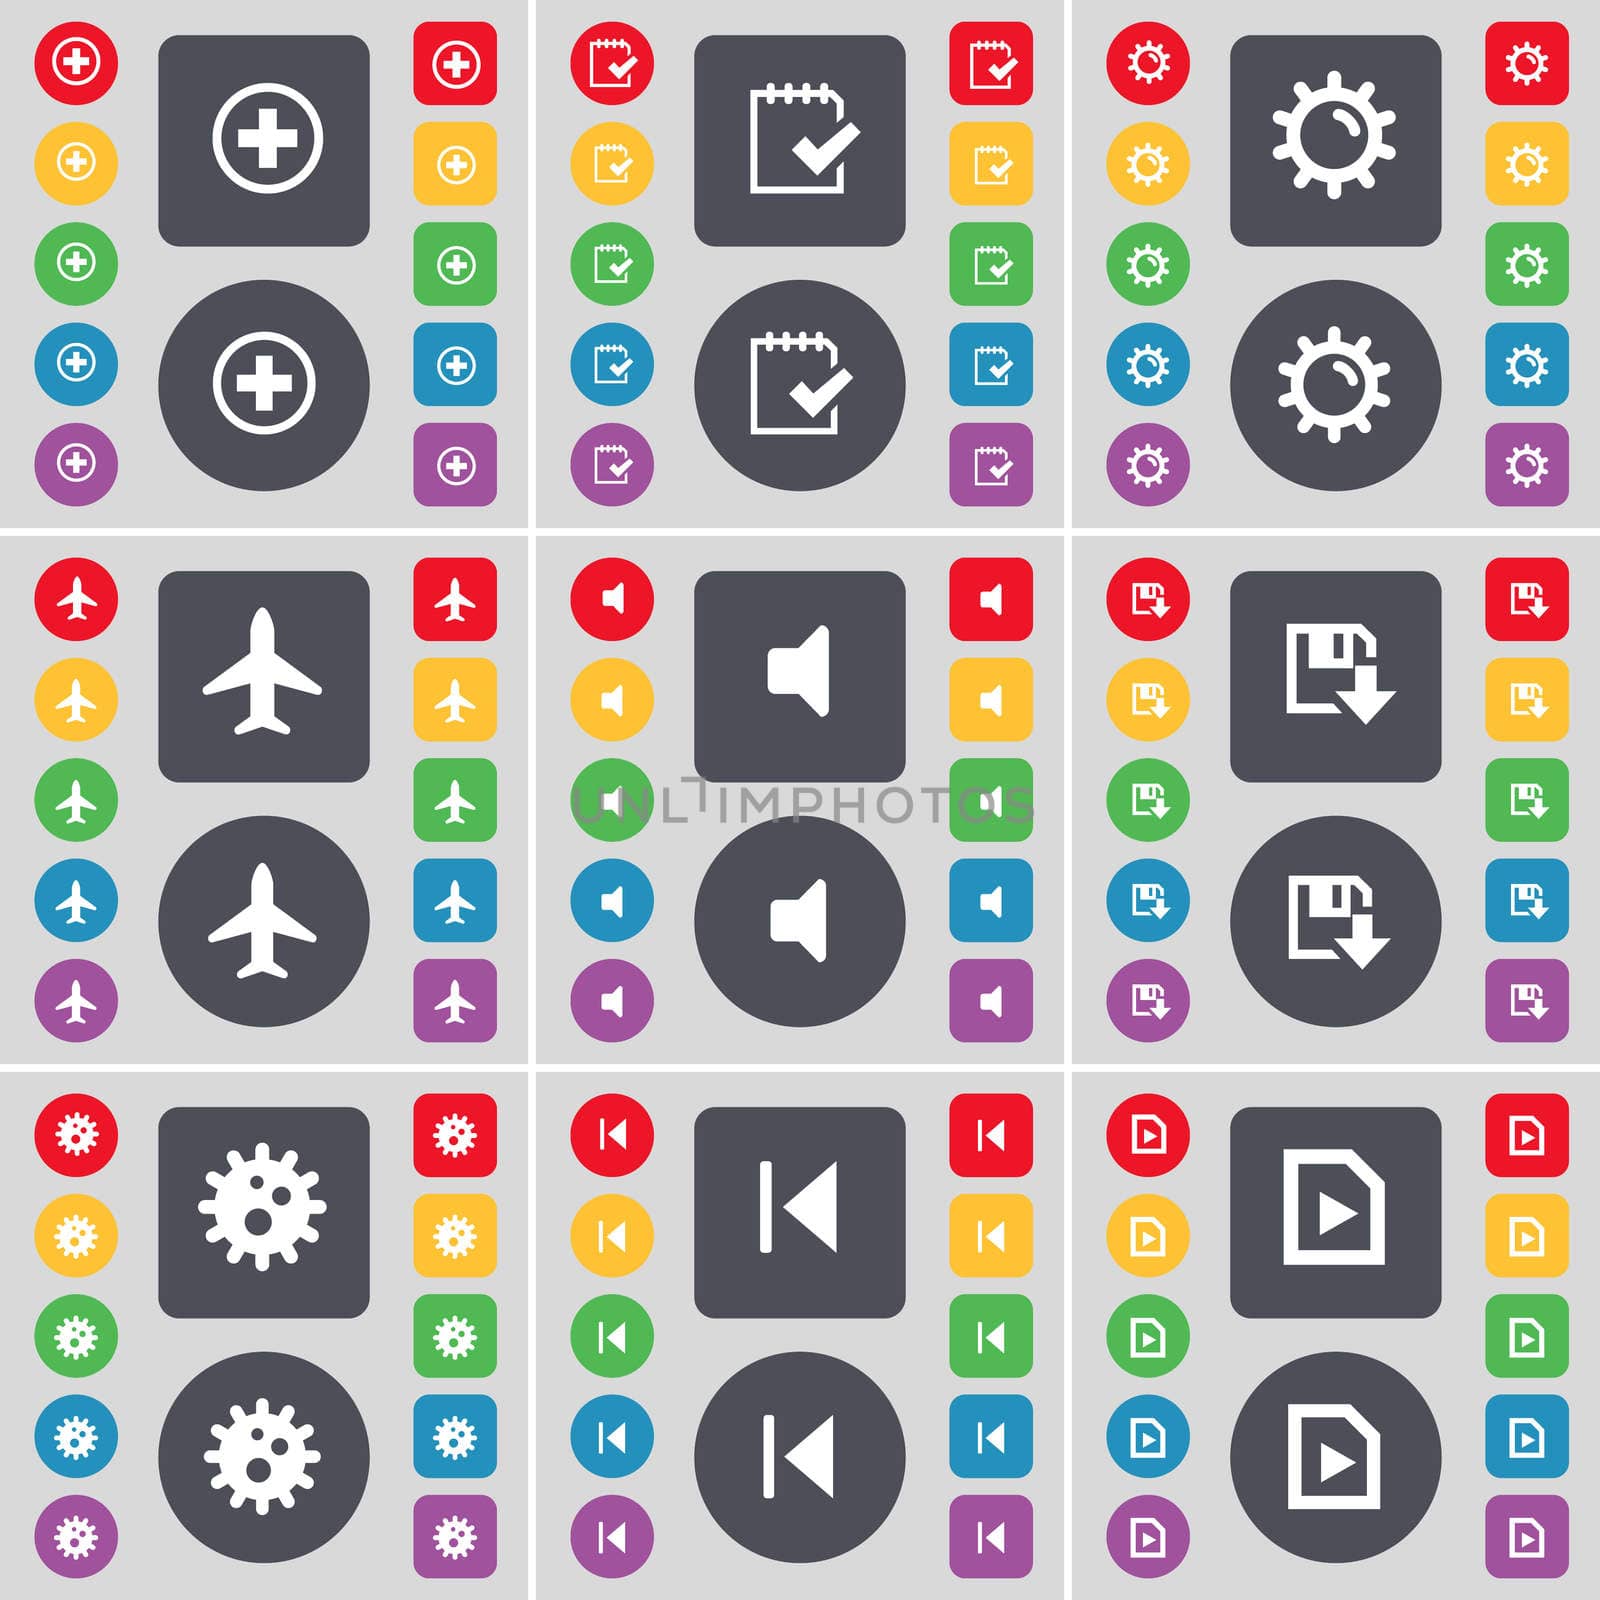 Plus, Survey, Gear, Airplane, Sound, Floppy, Gear, Media skip, M icon symbol. A large set of flat, colored buttons for your design.  by serhii_lohvyniuk